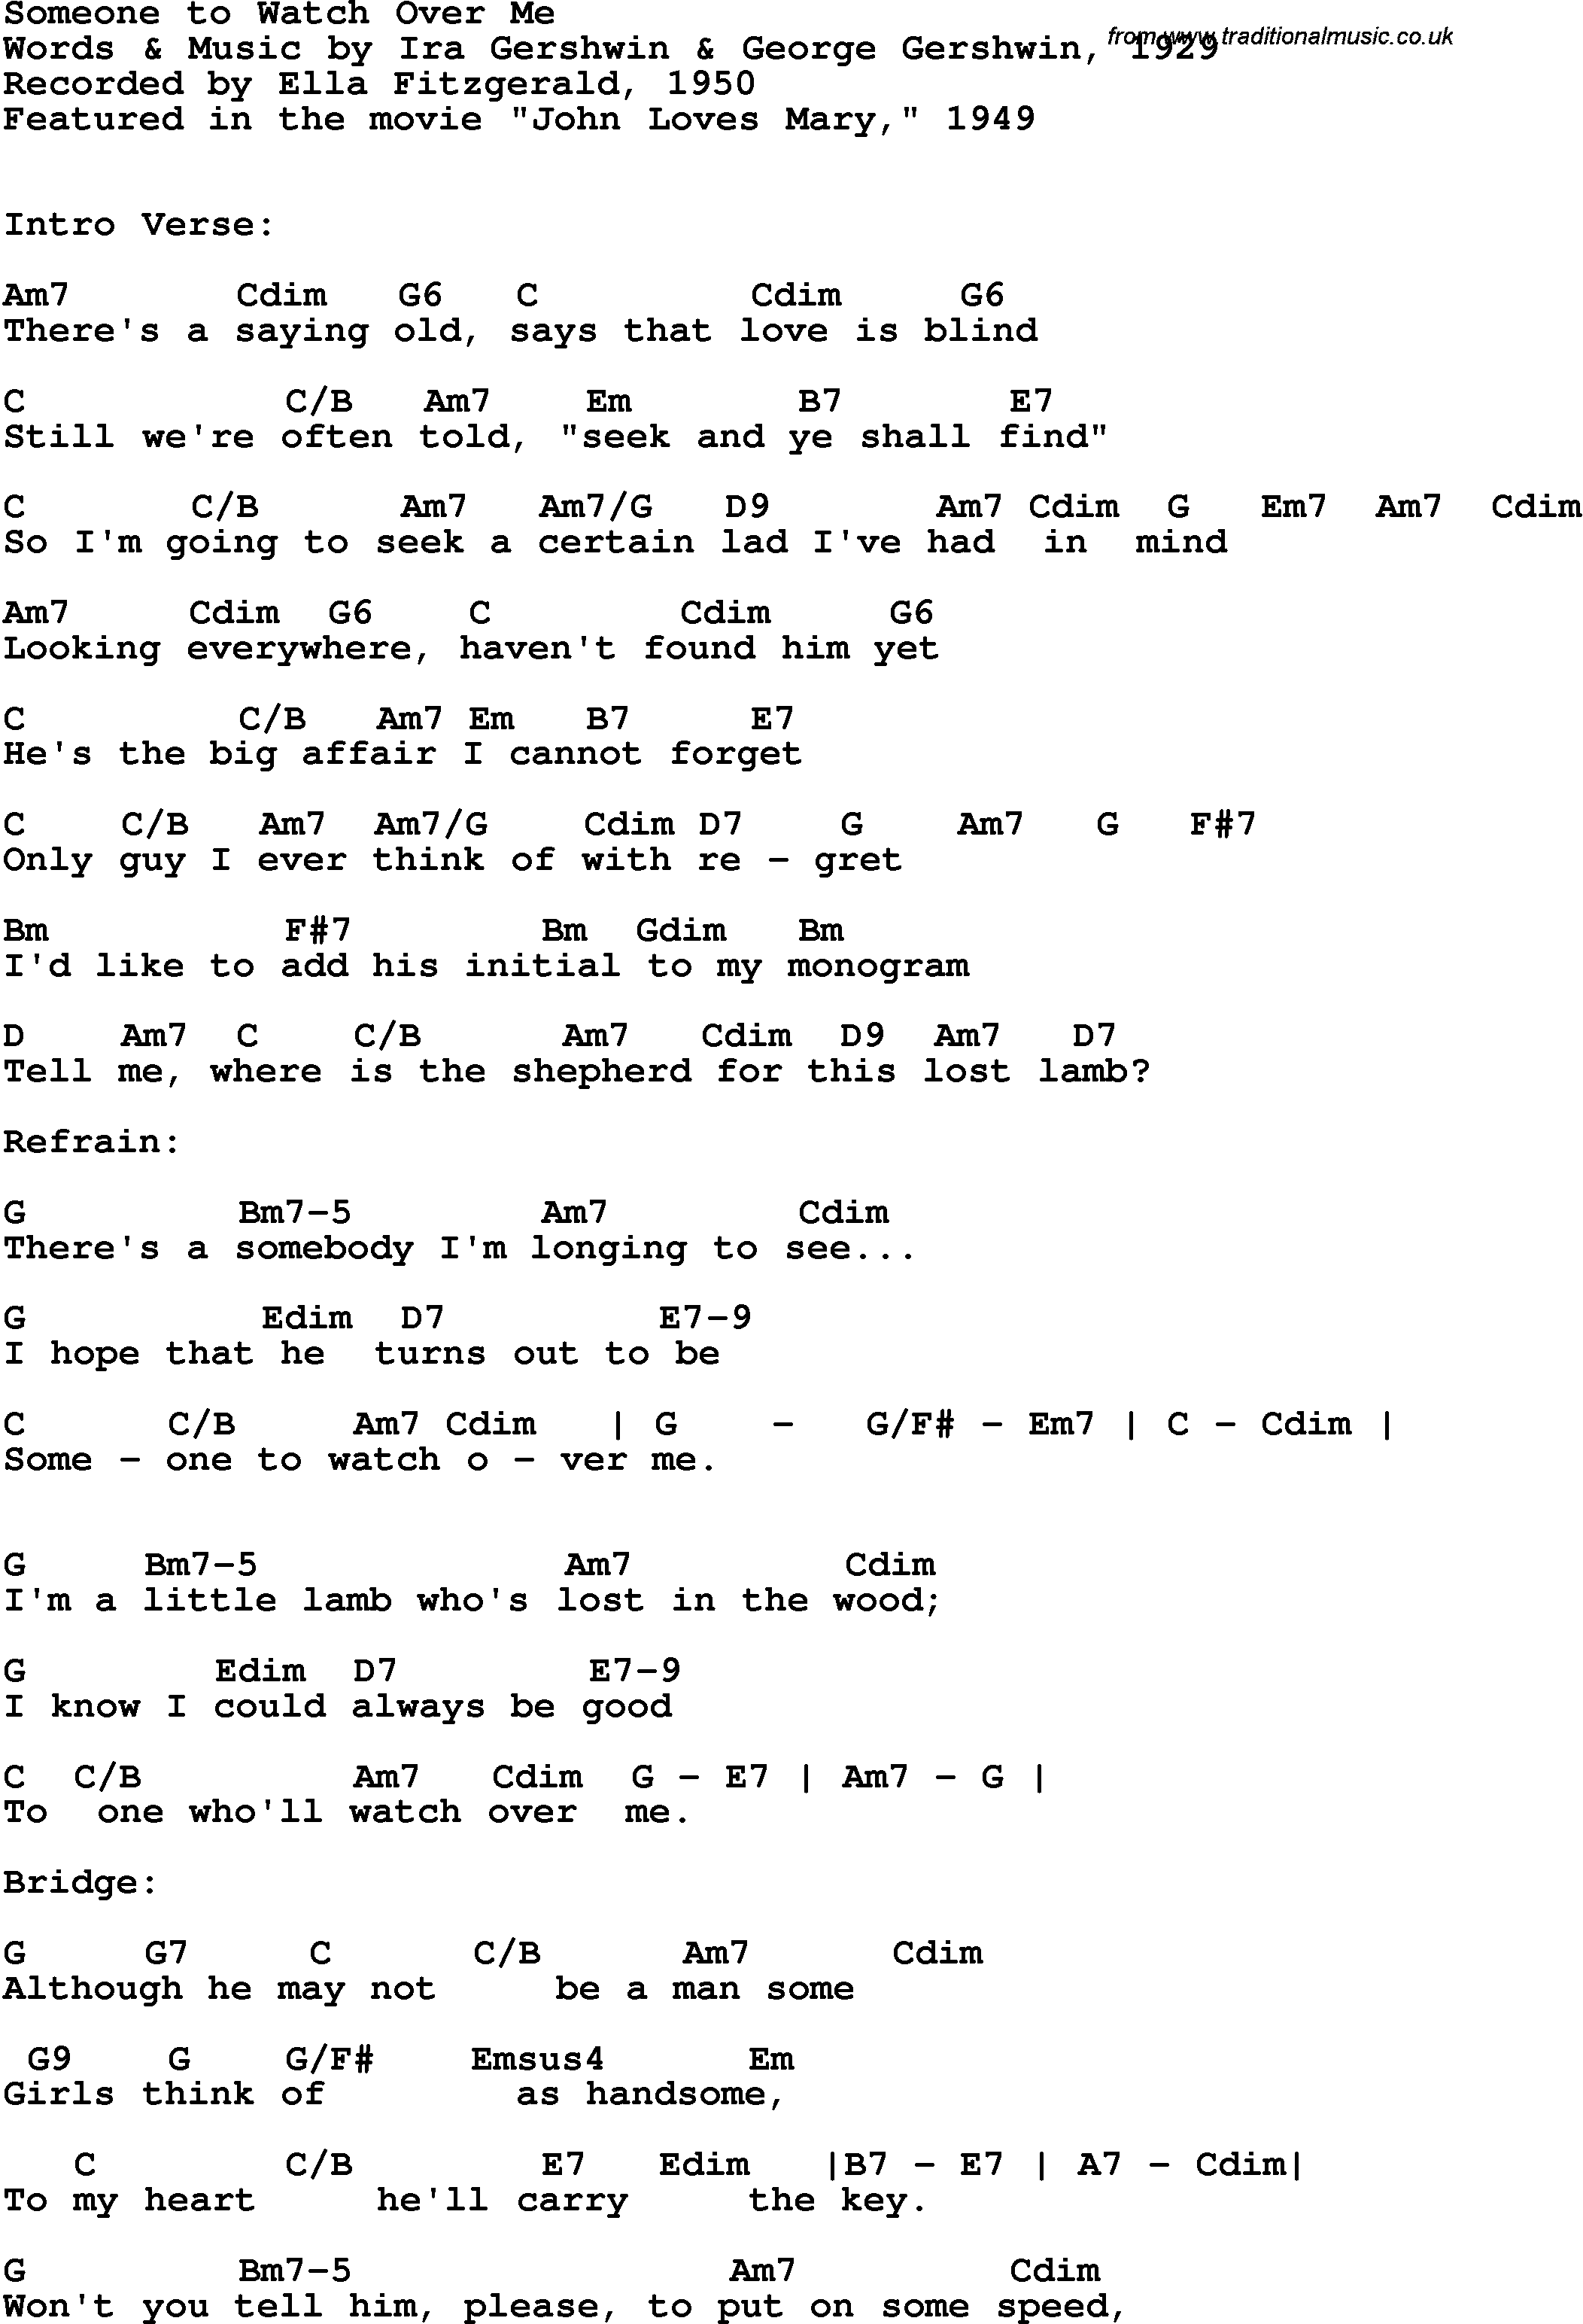 Song Lyrics with guitar chords for Someone To Watch Over Me -ella Fitzgerald, 1950